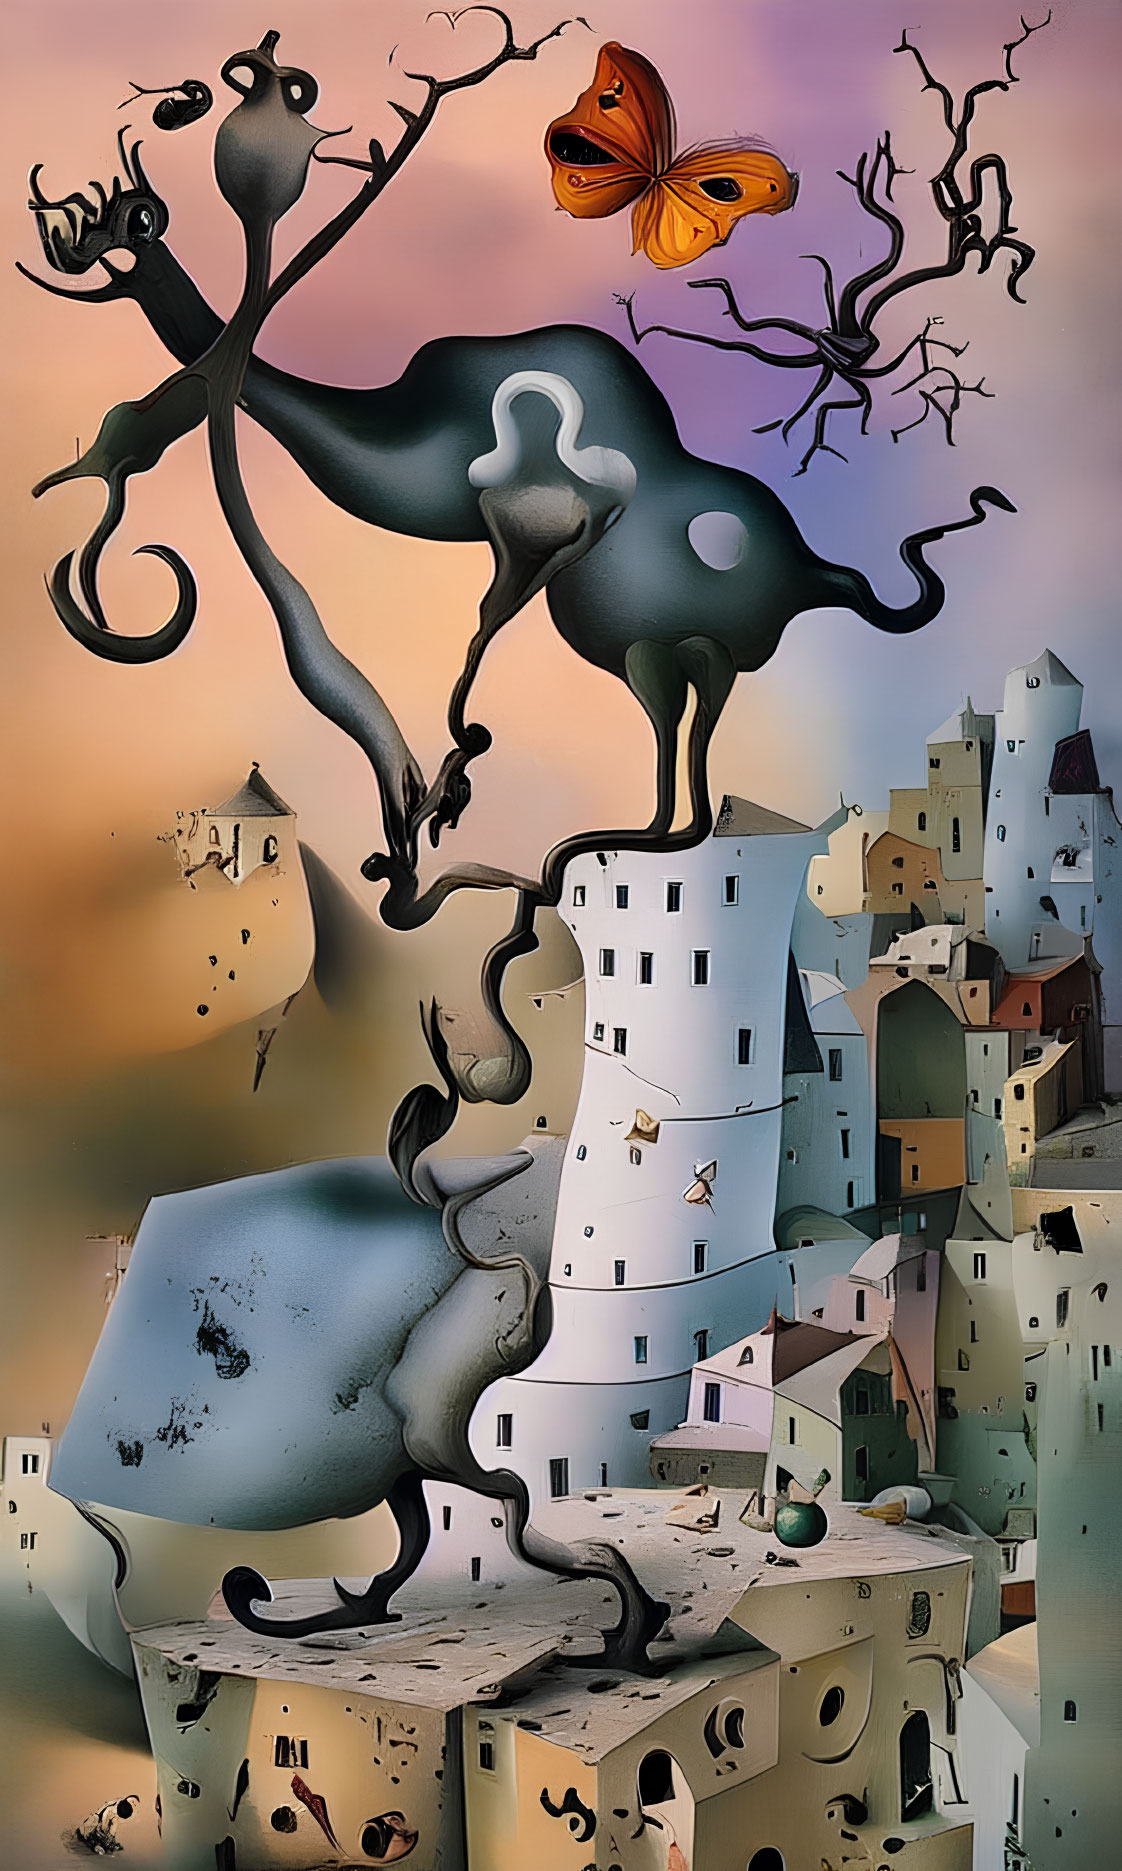 Surrealist artwork: Distorted animal figure with antlers in dreamlike cityscape